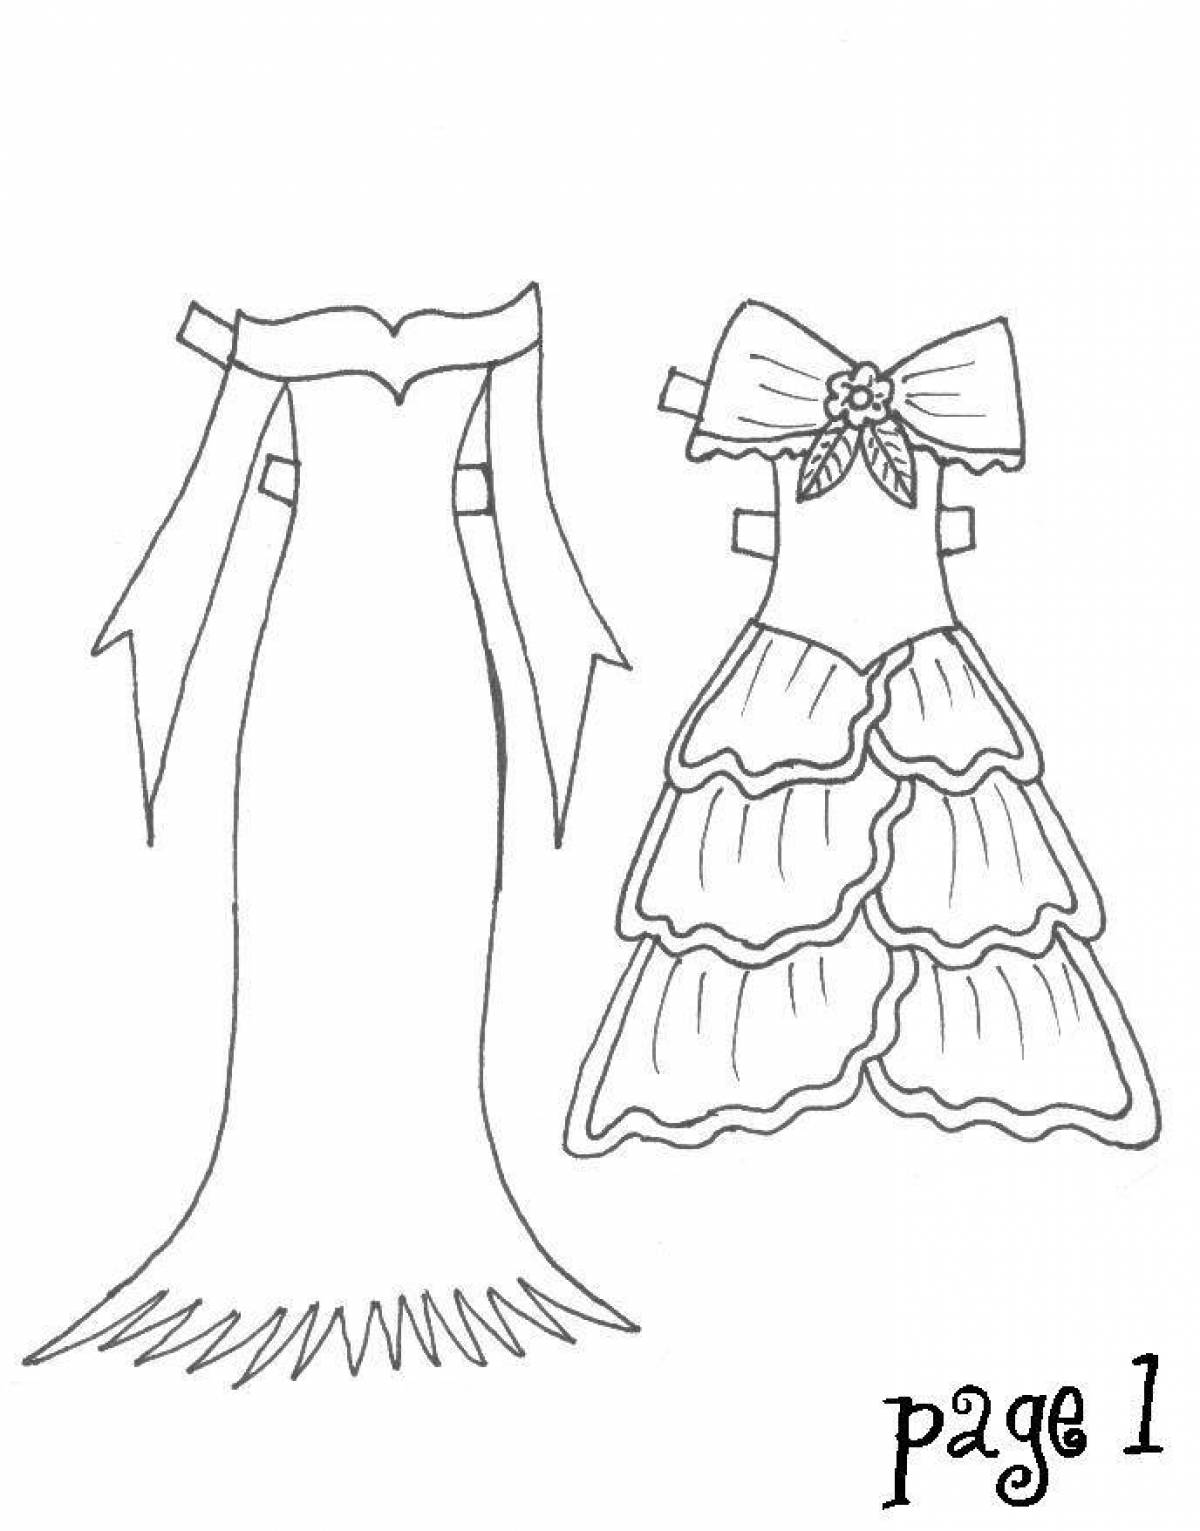 Coloring book shining dress for doll